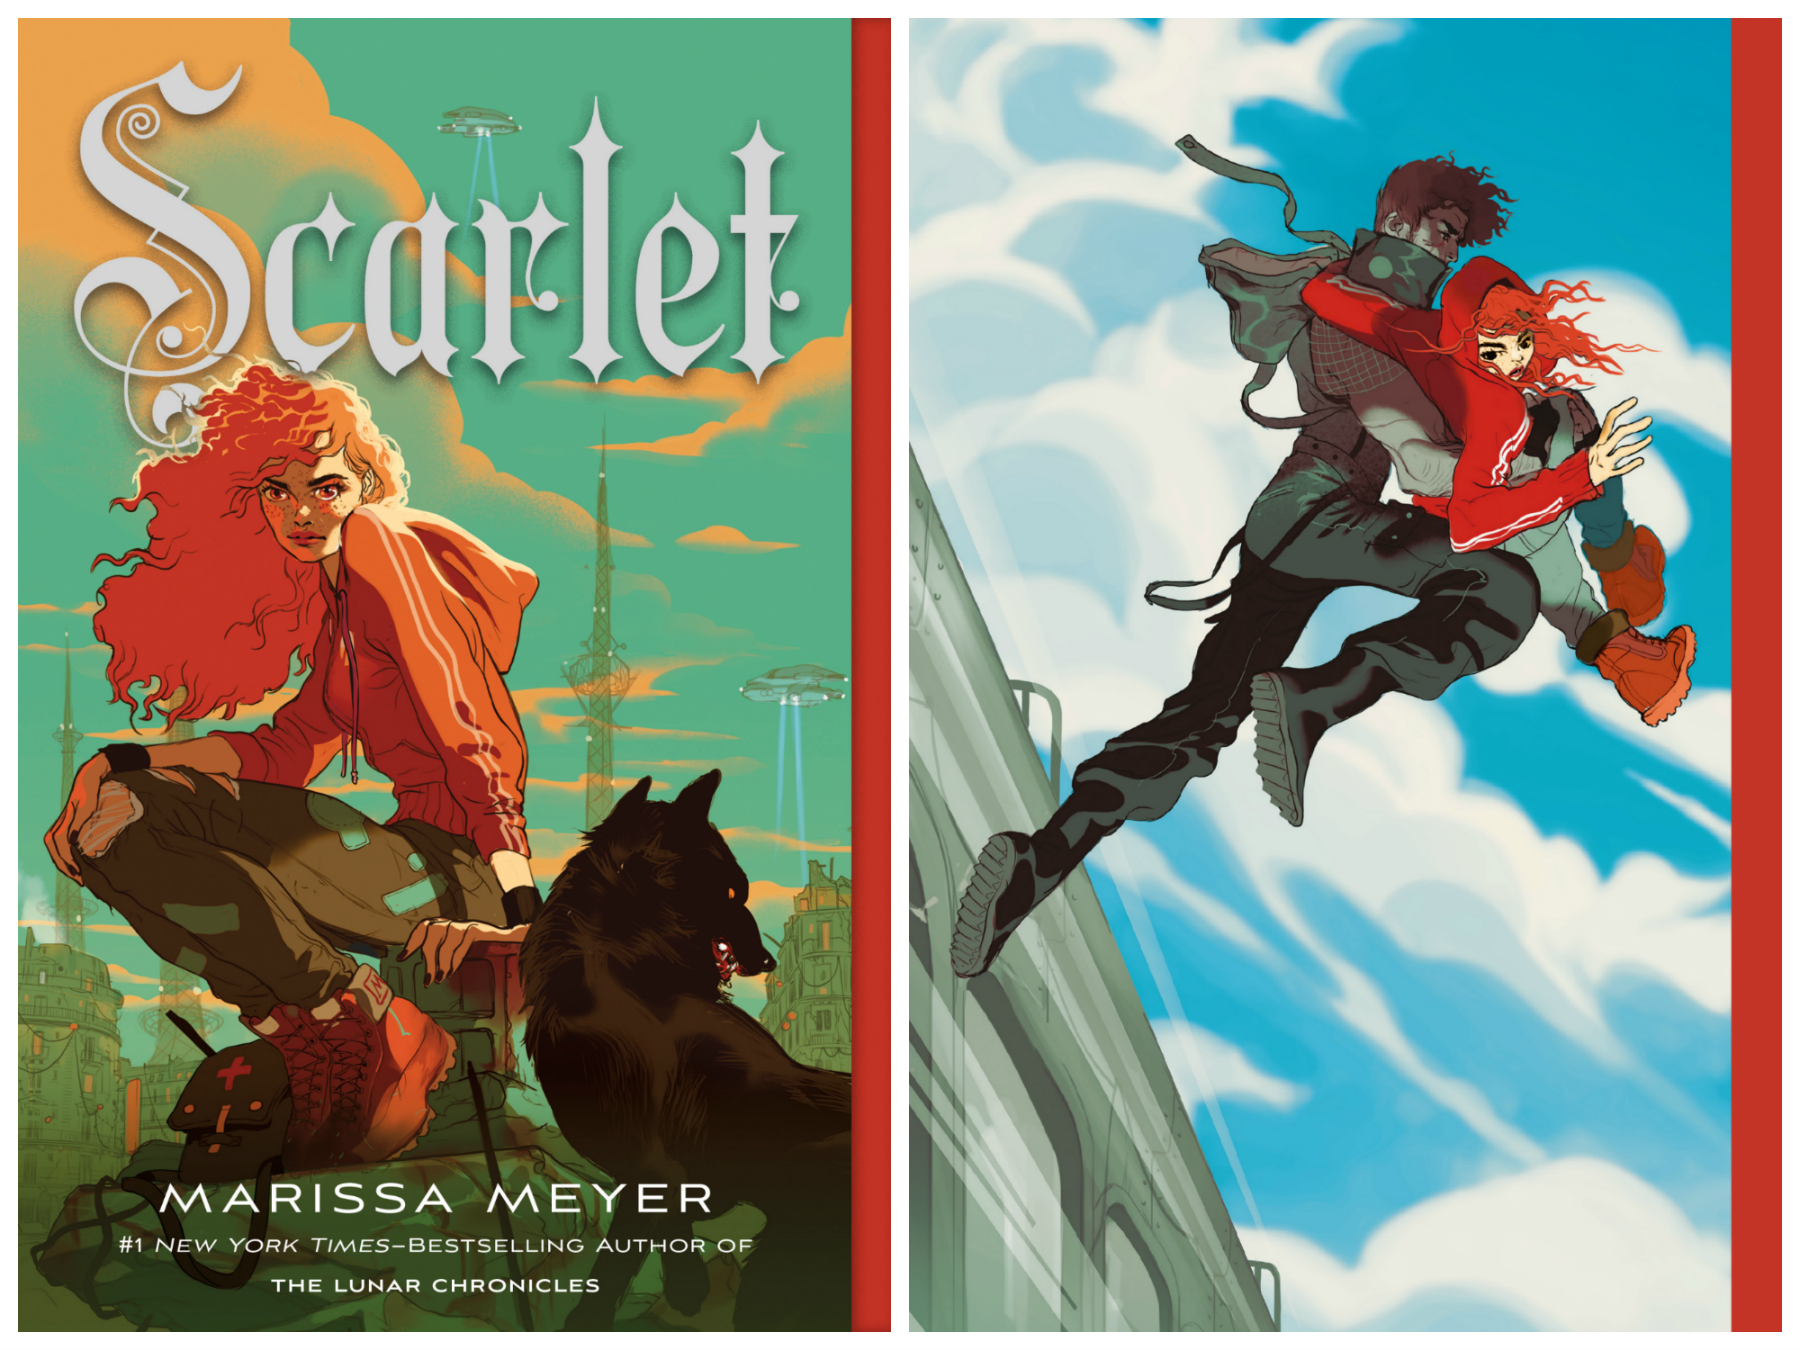 Marissa Meyer’s Lunar Chronicles Series is Getting a Brand New Look